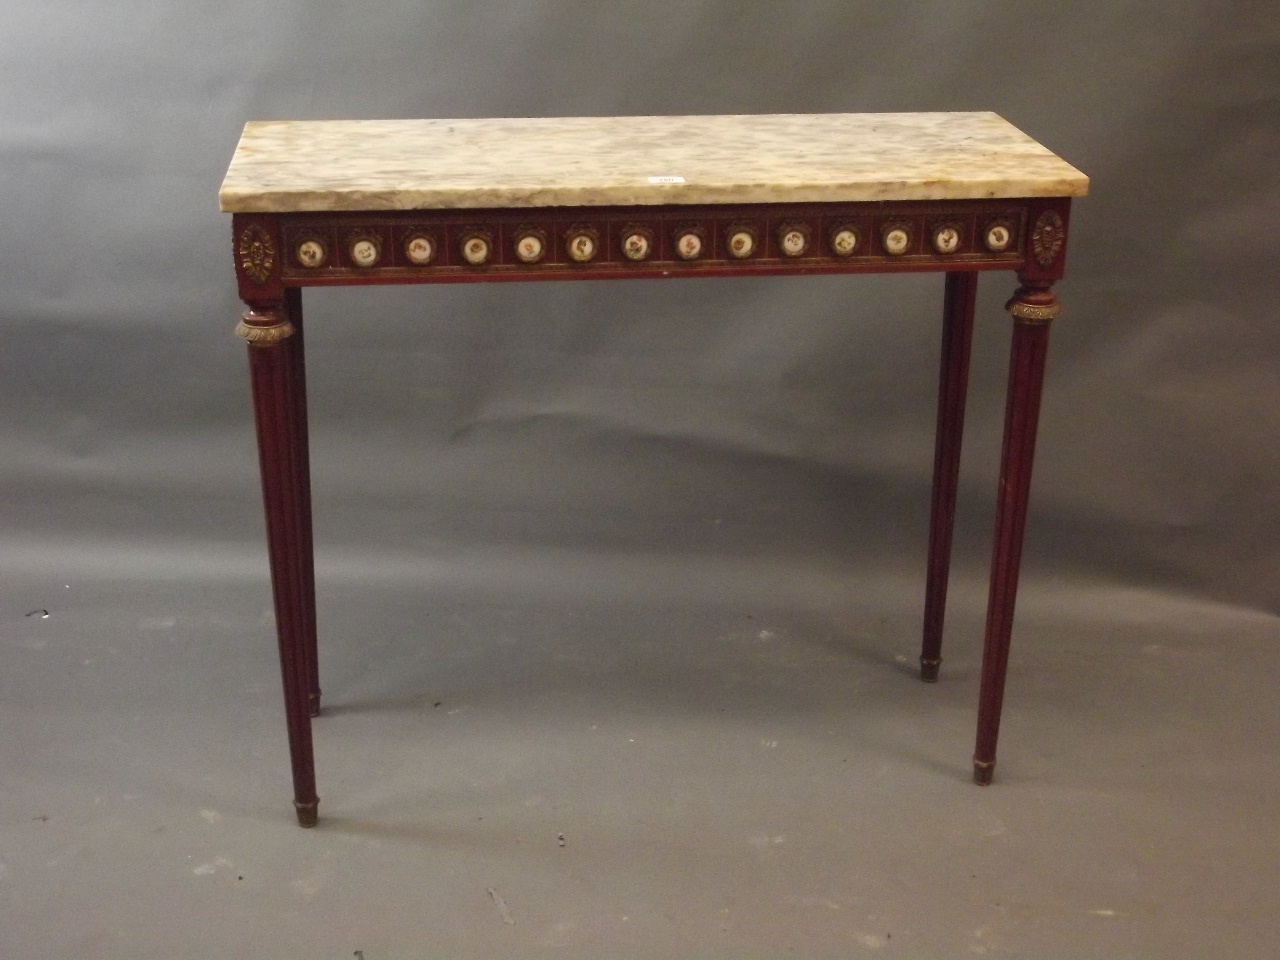 A French style mahogany and brass mounted console table with marble top and frieze comprising